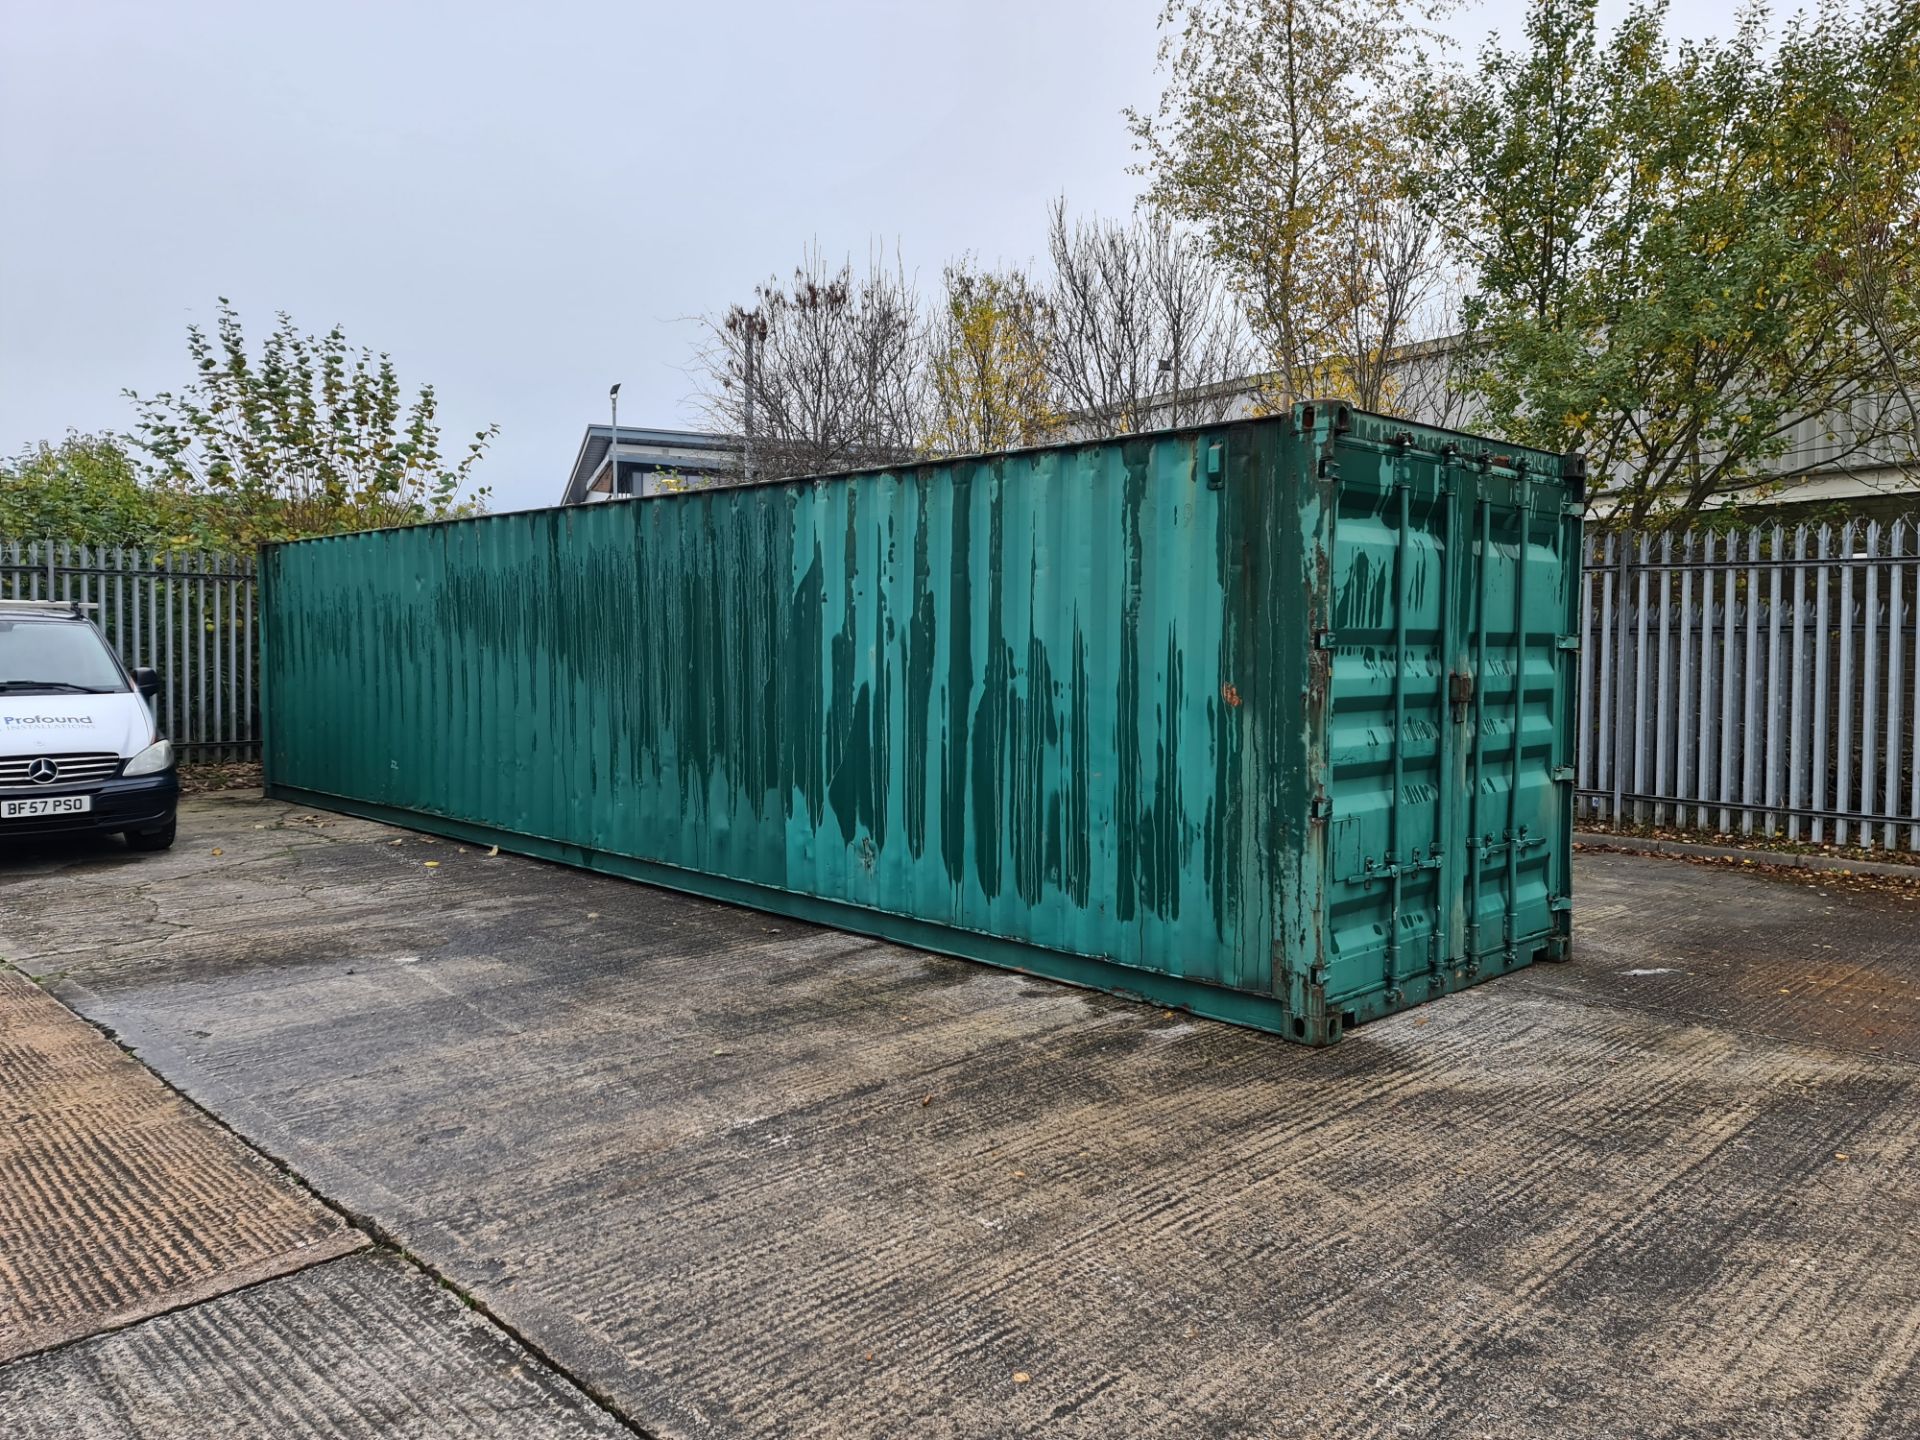 Shipping container, 40 foot in length including contents. The contents appear to comprise flatpack